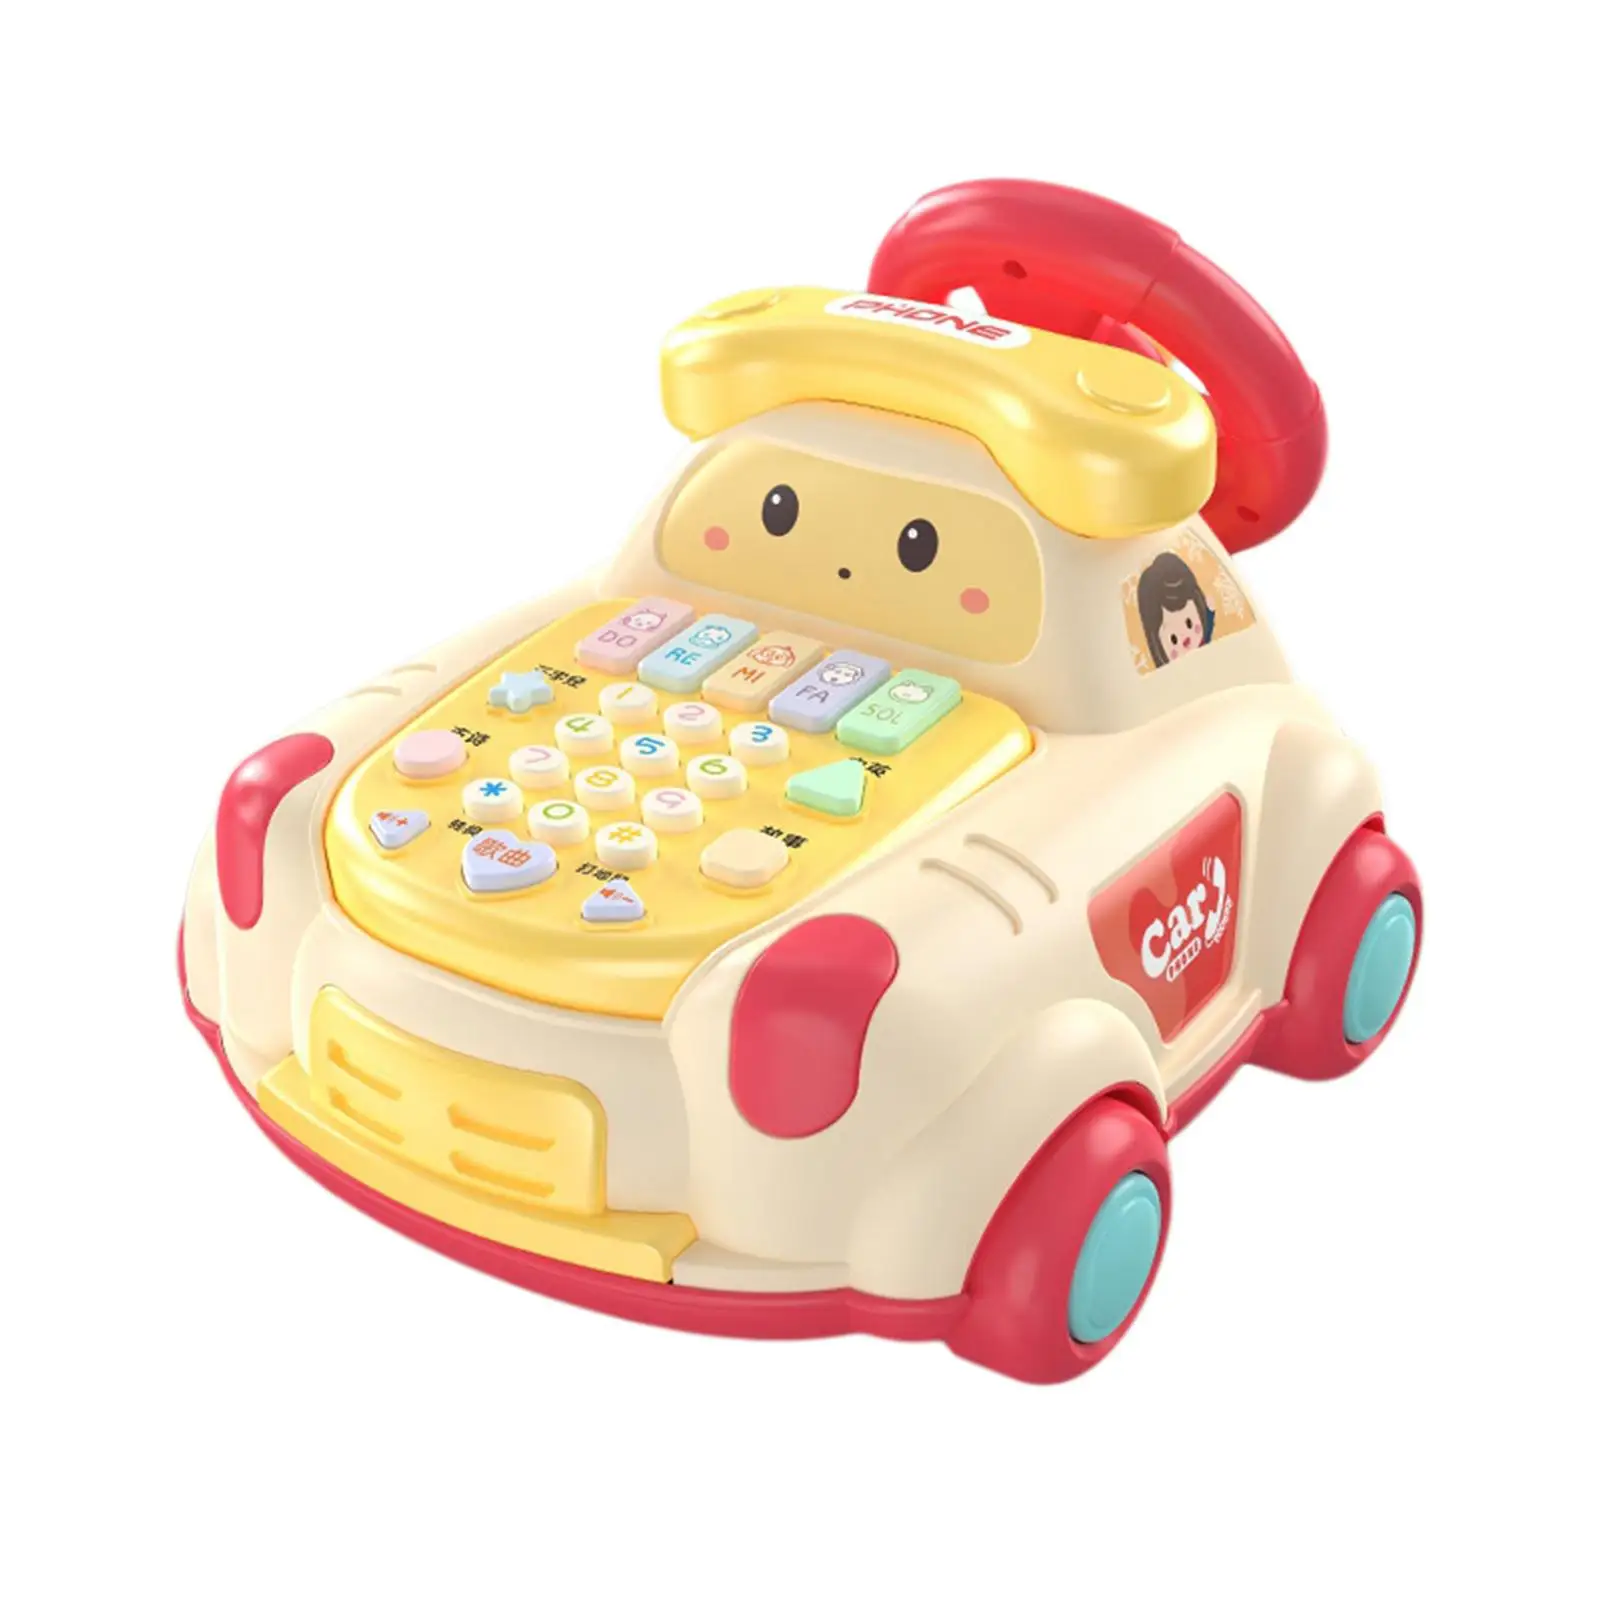 Children Phone Toy Movable Baby Telephone Toy for Game Interaction Learning